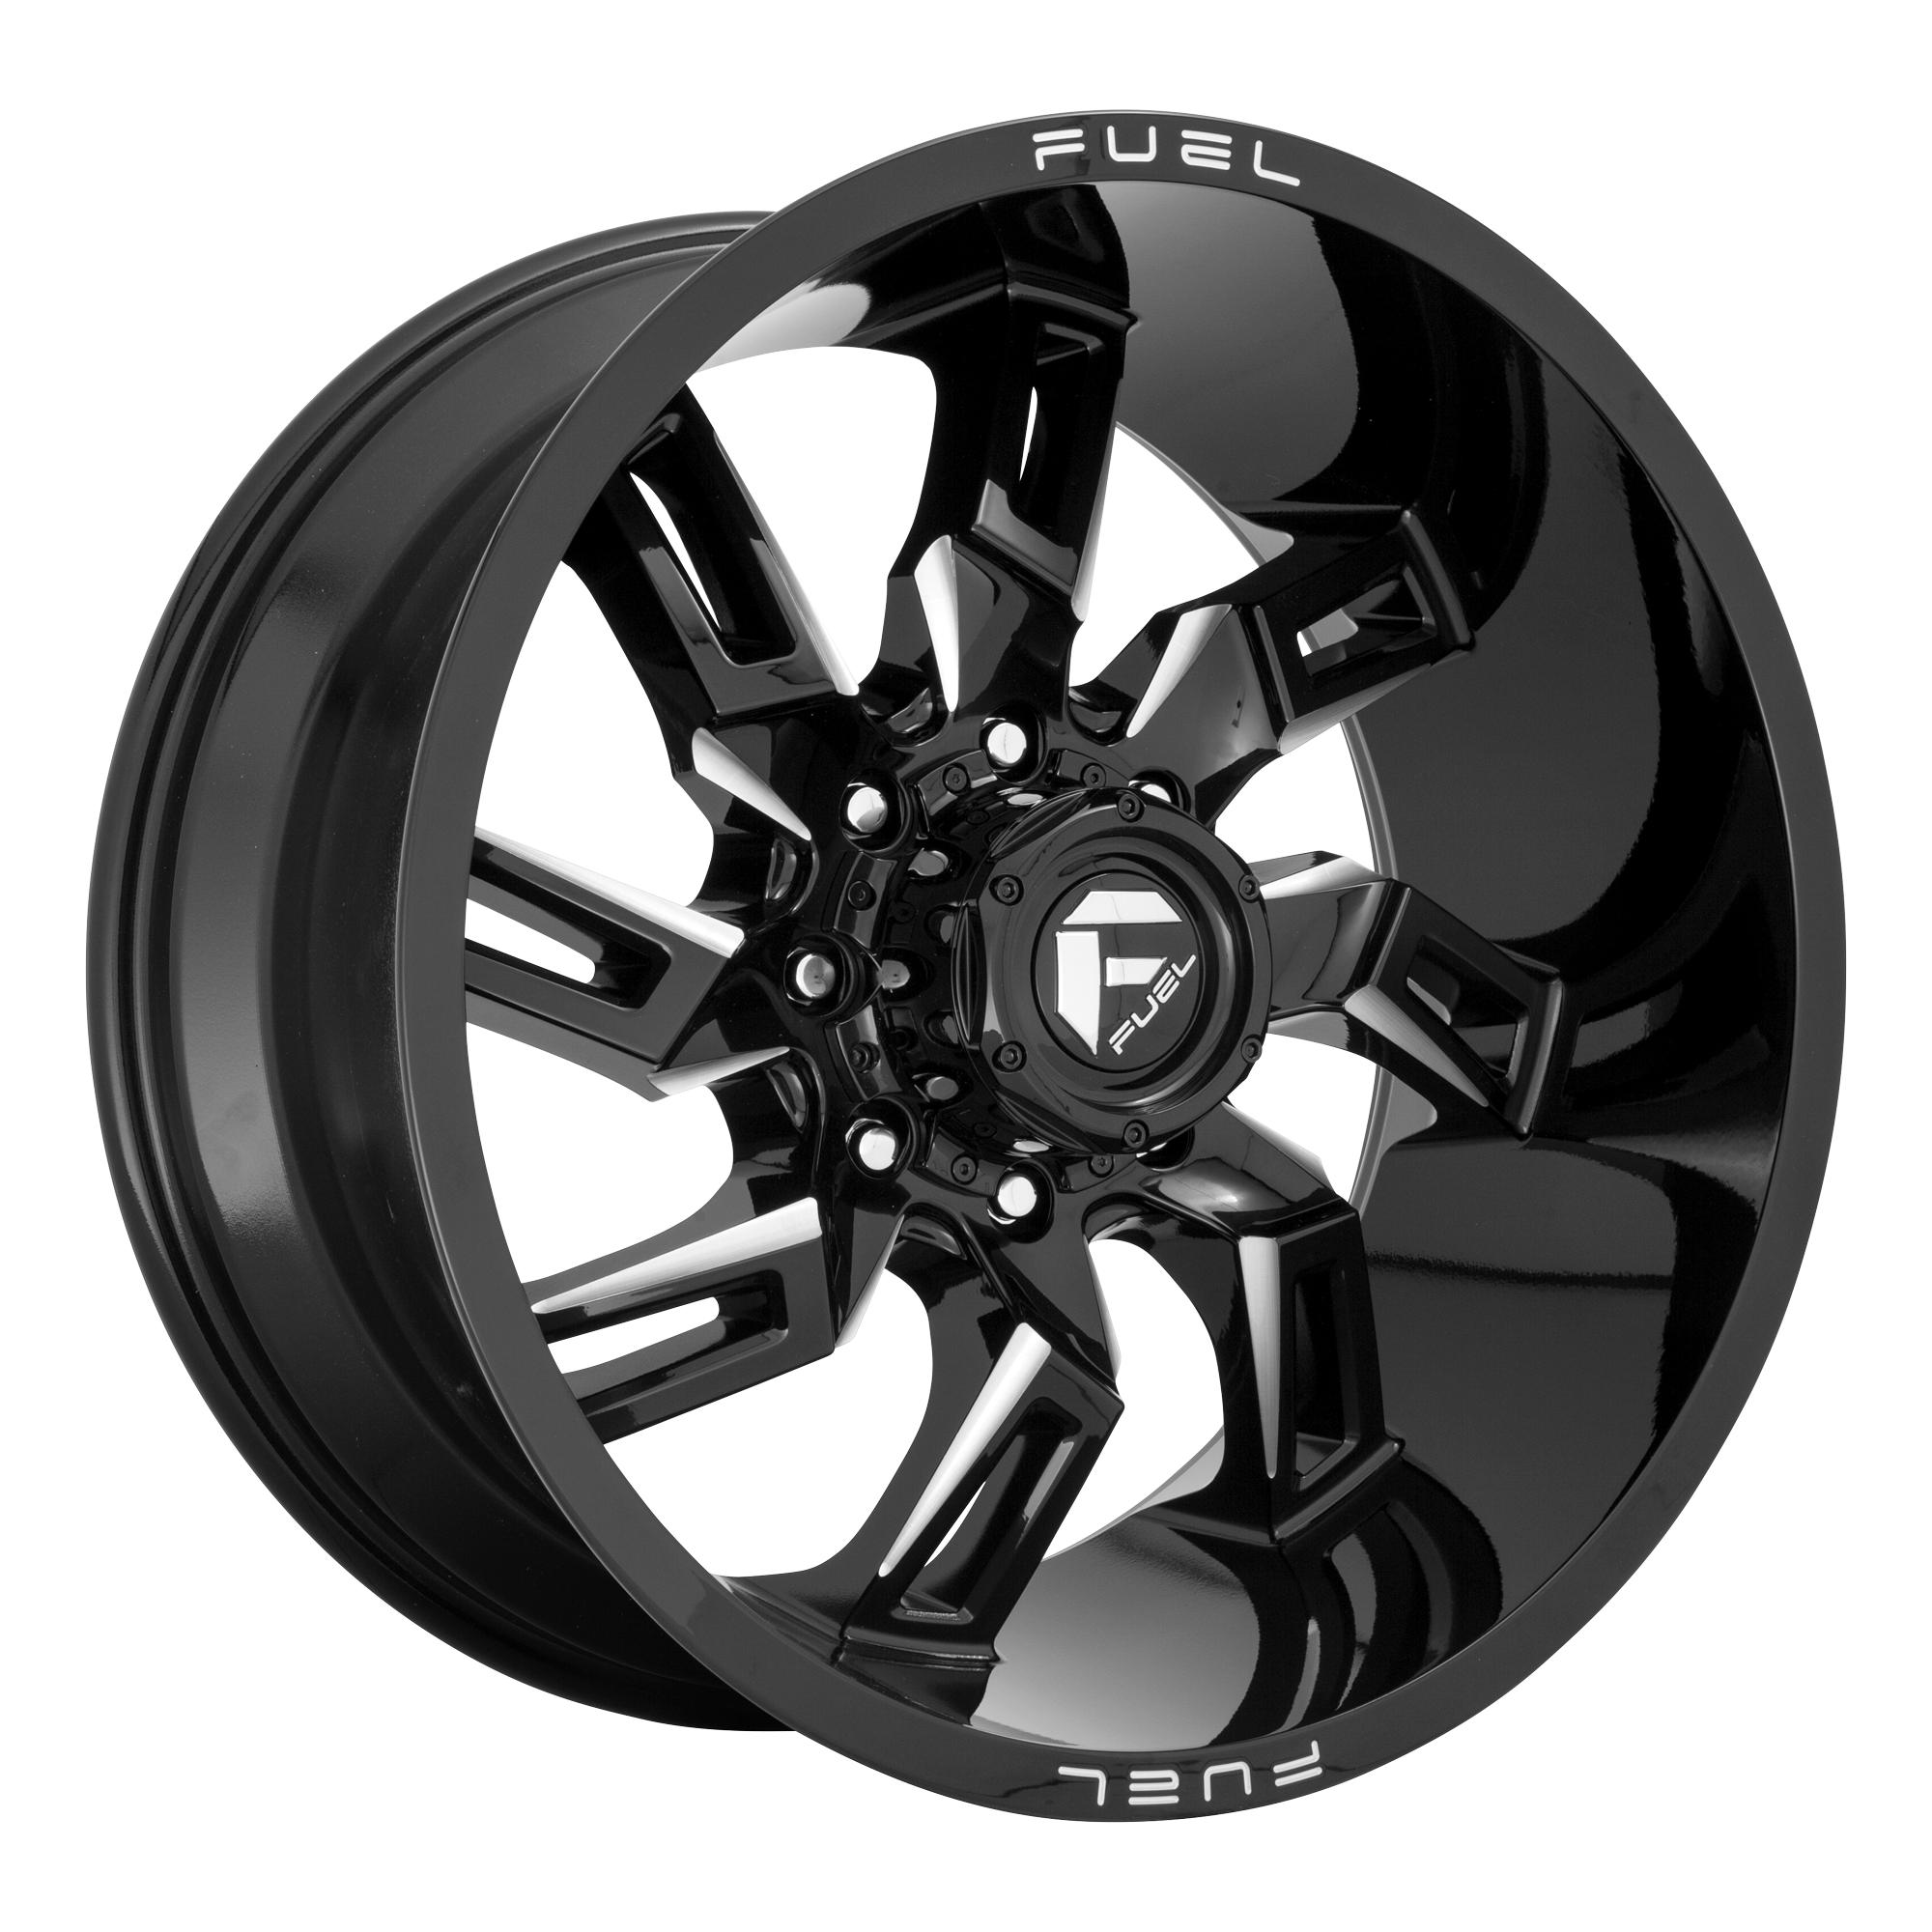 LOCKDOWN 20x10 6x139.70 GLOSS BLACK MILLED (-18 mm) - Tires and Engine Performance